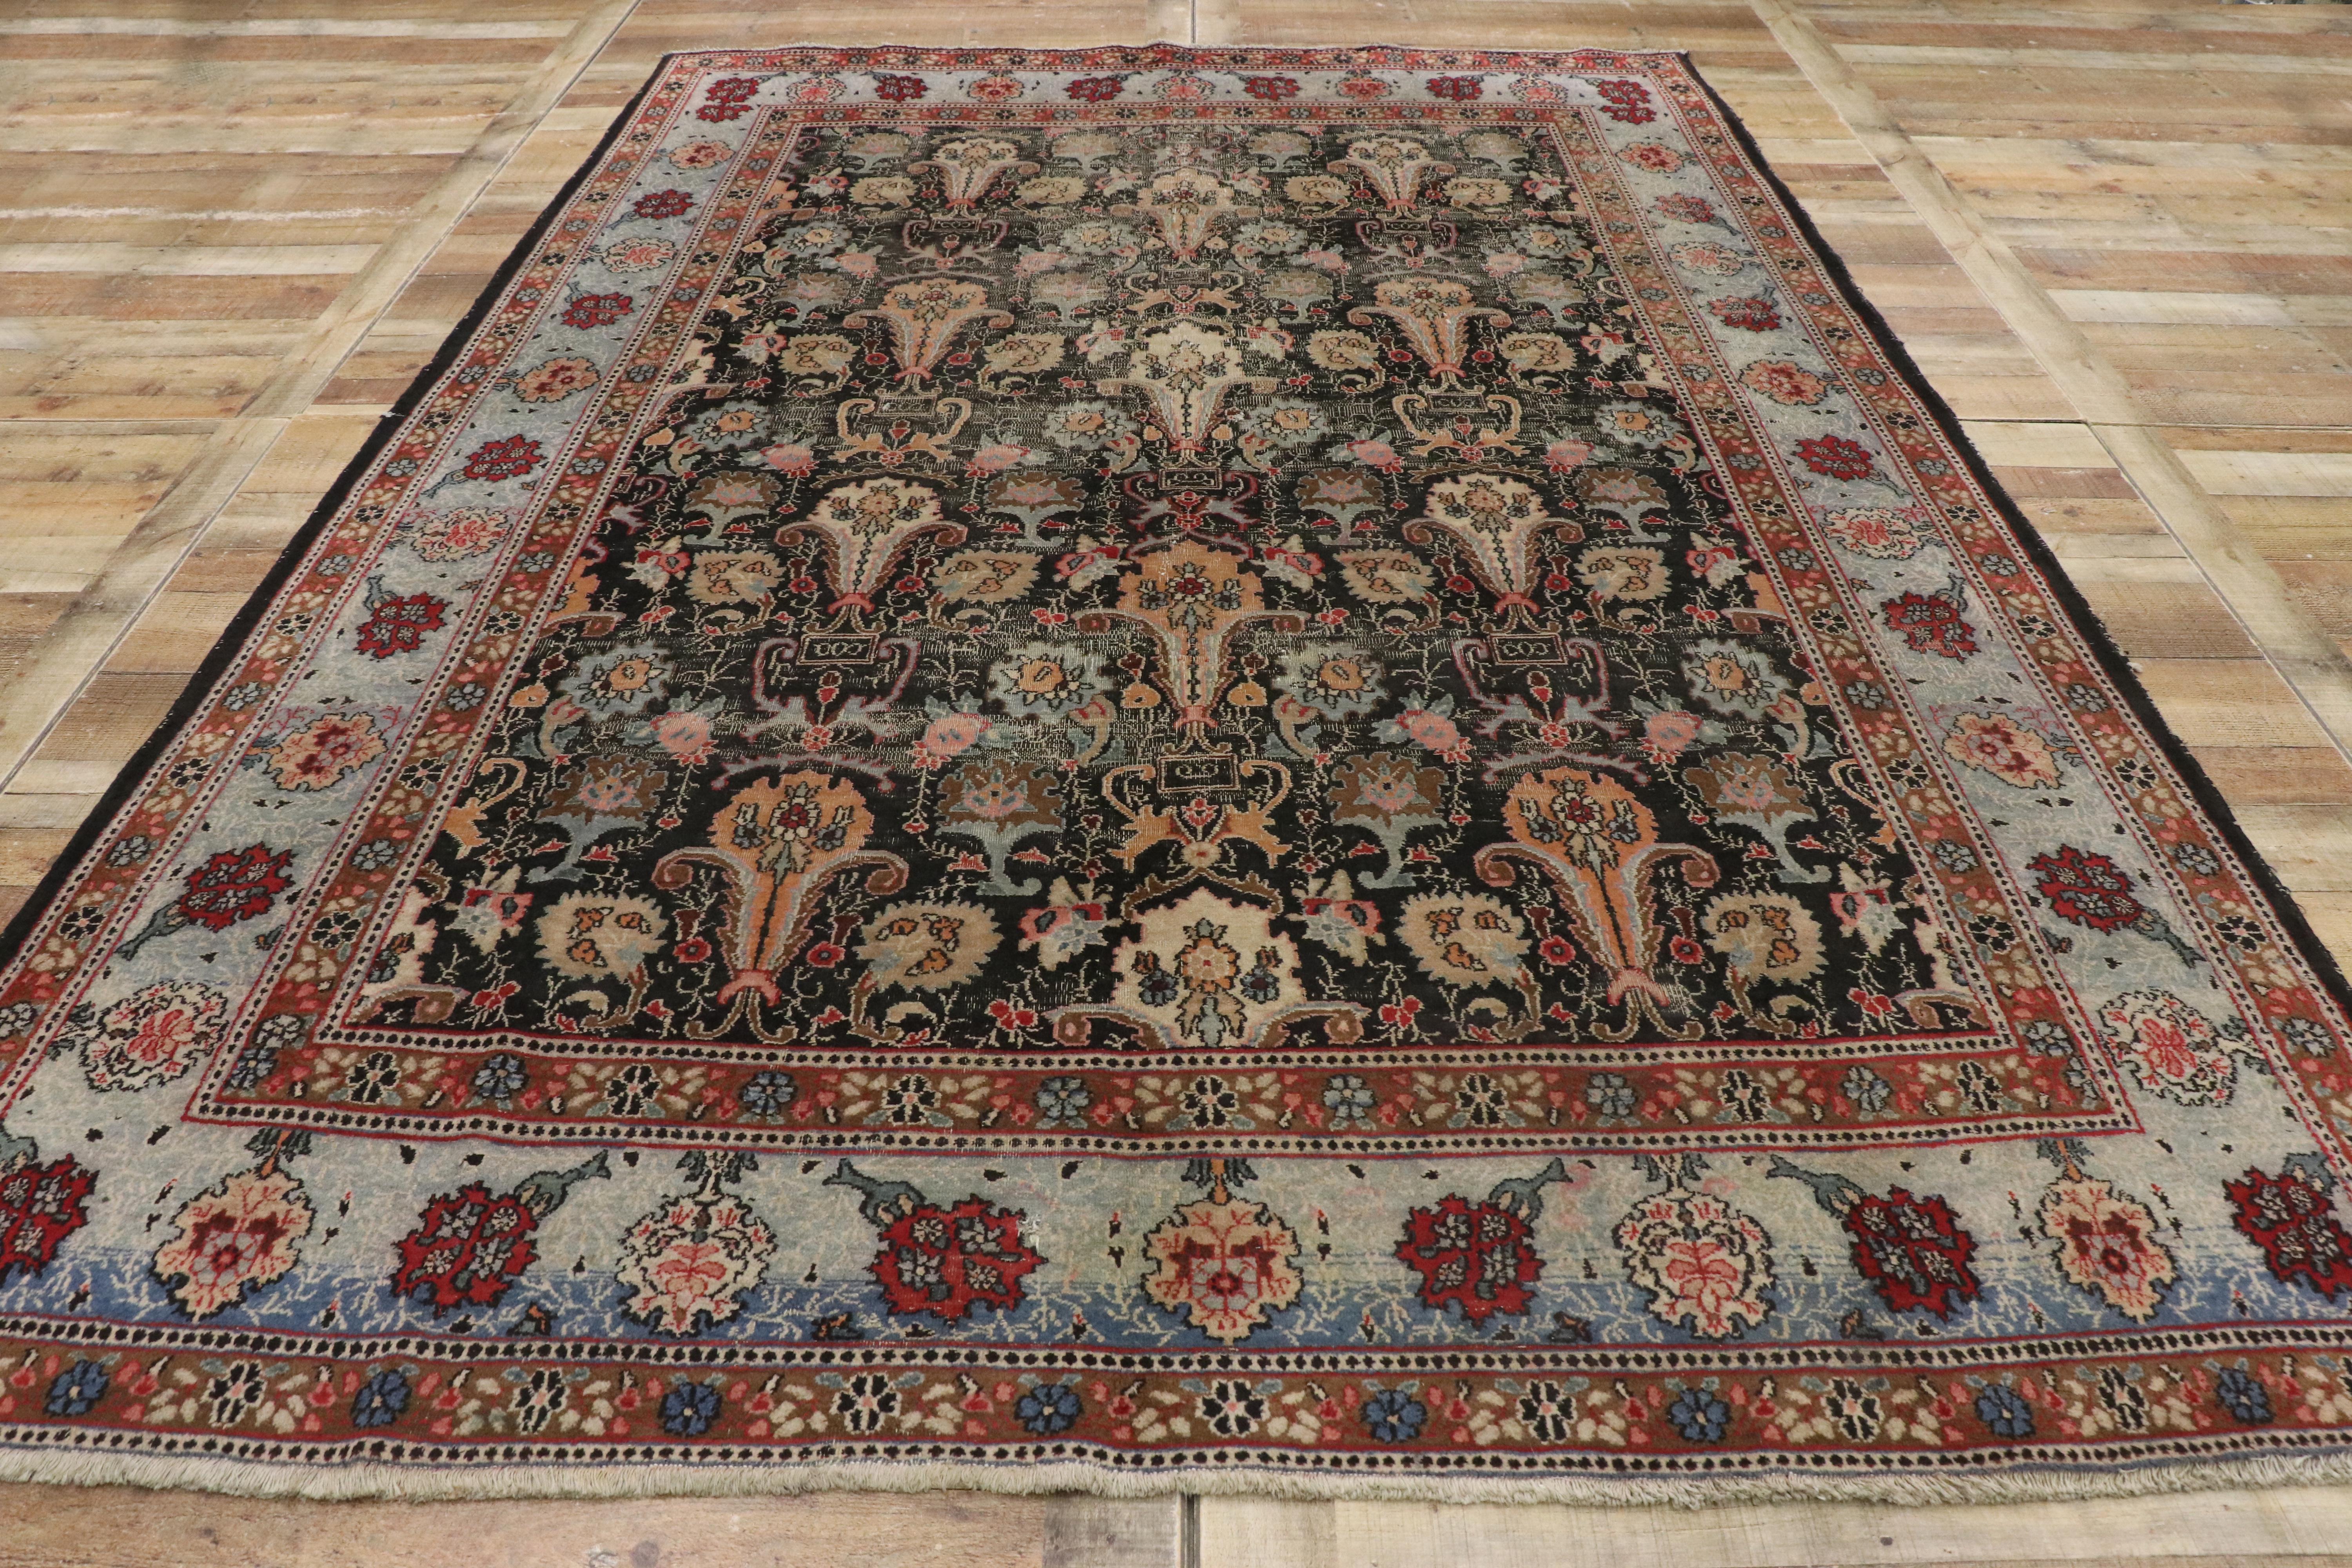 Distressed Antique Persian Khorassan Rug with Rustic American Colonial Style For Sale 3